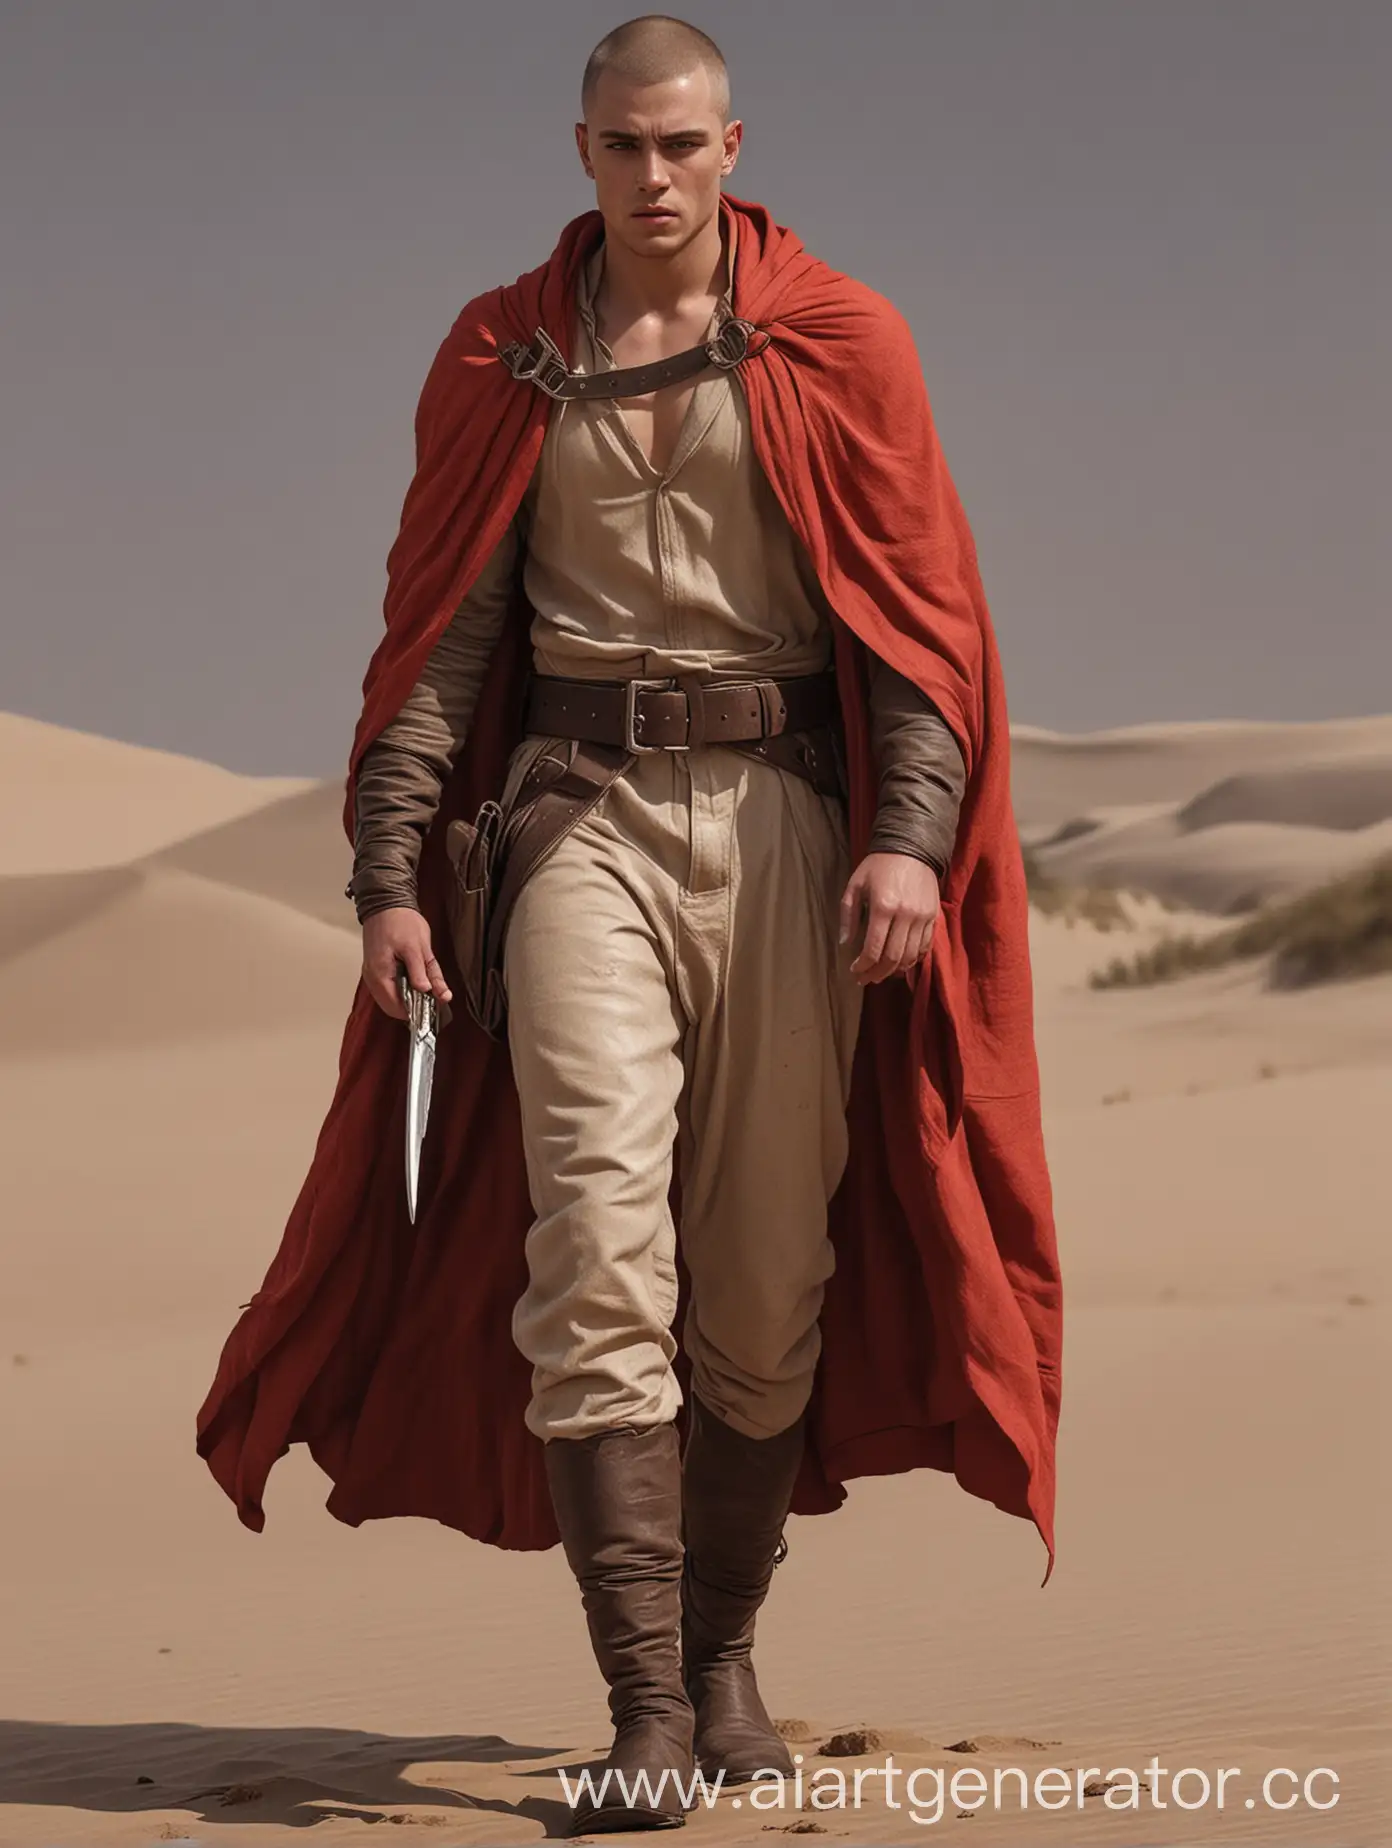 Young-Man-with-Buzz-Cut-Hairstyle-and-Red-Cloak-in-Dune-Style